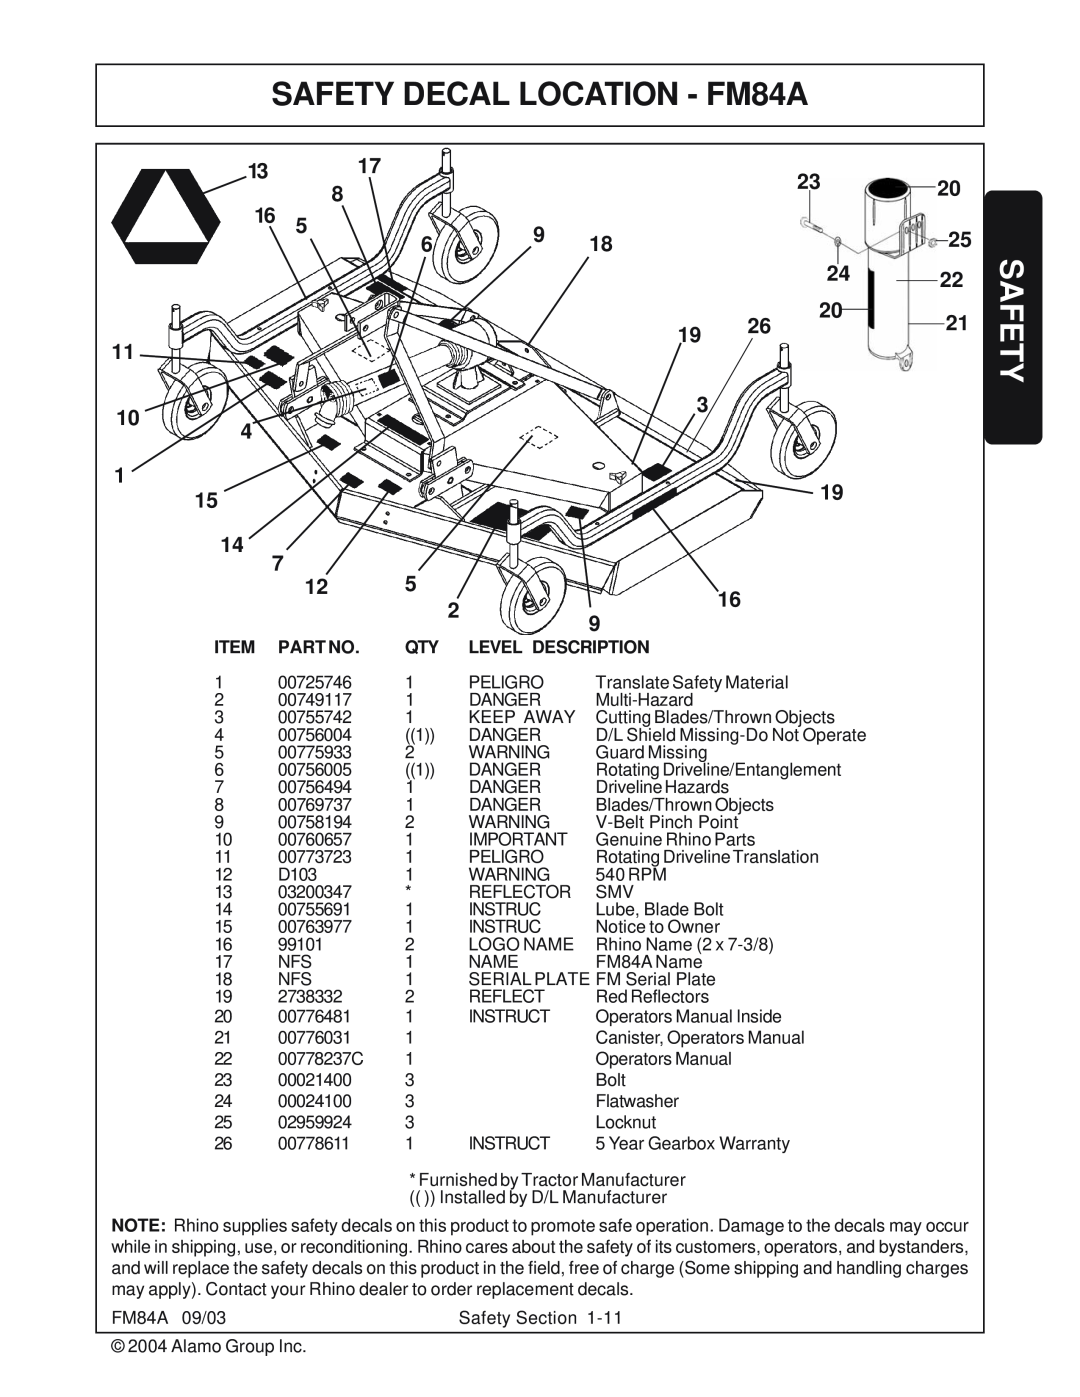 Servis-Rhino manual SAFETY DECAL LOCATION - FM84A, Safety, Item Part No, Level Description 